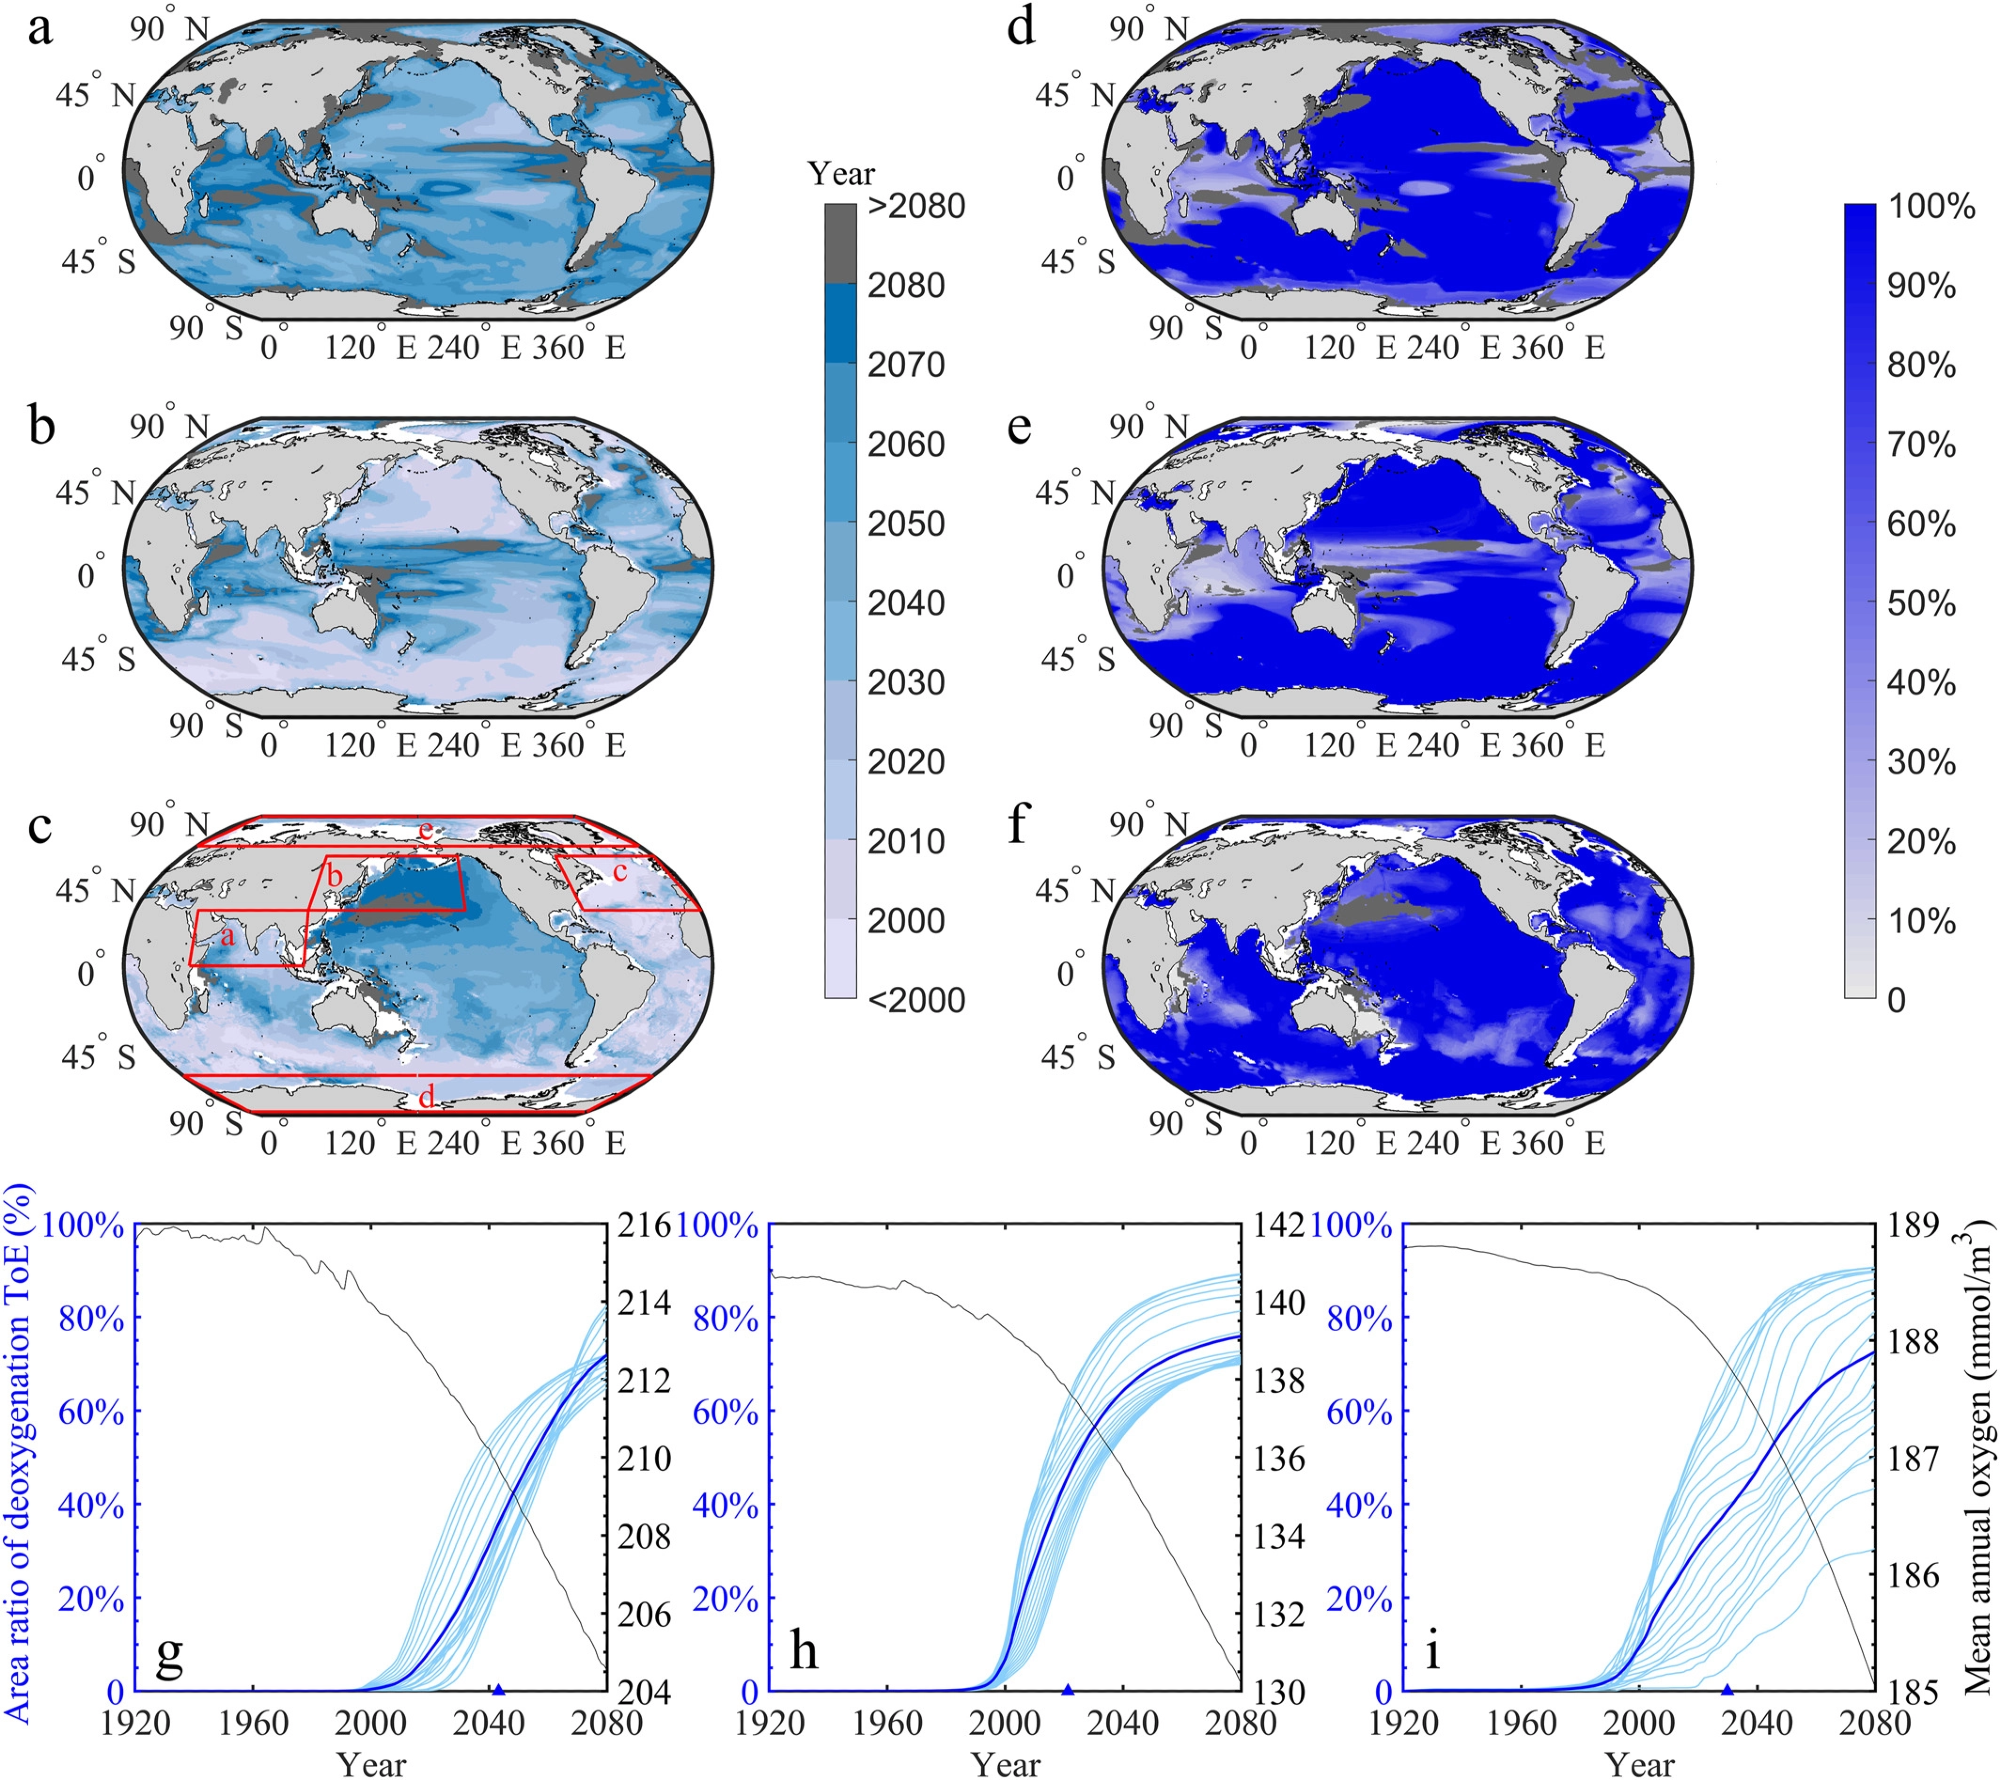 Time of emergences (ToEs) of the deoxygenation signal in the epipelagic, mesopelagic, and bathypelagic zones under the RCP8.5 scenario from 1920 to 2080. Spatial maps show the mean ToEs of all the deoxygenation layers within each zone (a–c), and the percentage of the vertical layers that are projected to experience deoxygenation within each zone at each grid (d–f). The deoxygenation ratio of each zone represents the fraction of the layers that are characterized by deoxygenation to all layers within that zone. Dark gray indicates no emergence of deoxygenation by 2080. The right y axis of the bottom panel shows a time series of global oxygen concentrations (black curve) of the (g) epipelagic, (h) mesopelagic, and (i) bathypelagic zones. The left y axis shows cumulative horizontal coverage ratios of all layers (light blue curves) within a zone (dark blue curves) where the deoxygenation signals emerge. The cumulative horizontal coverage ratio of the deoxygenation signal is the ratio of the area with deoxygenation signals in the oceanic area (g–i). Horizontally, the spatial coverage ratio of the deoxygenation signal is the ratio of the area with the deoxygenation signal to the oceanic area (g–i). The global mean ToEs of the (g) epipelagic, (h) mesopelagic, and (i) bathypelagic zones are indicated by blue triangles.